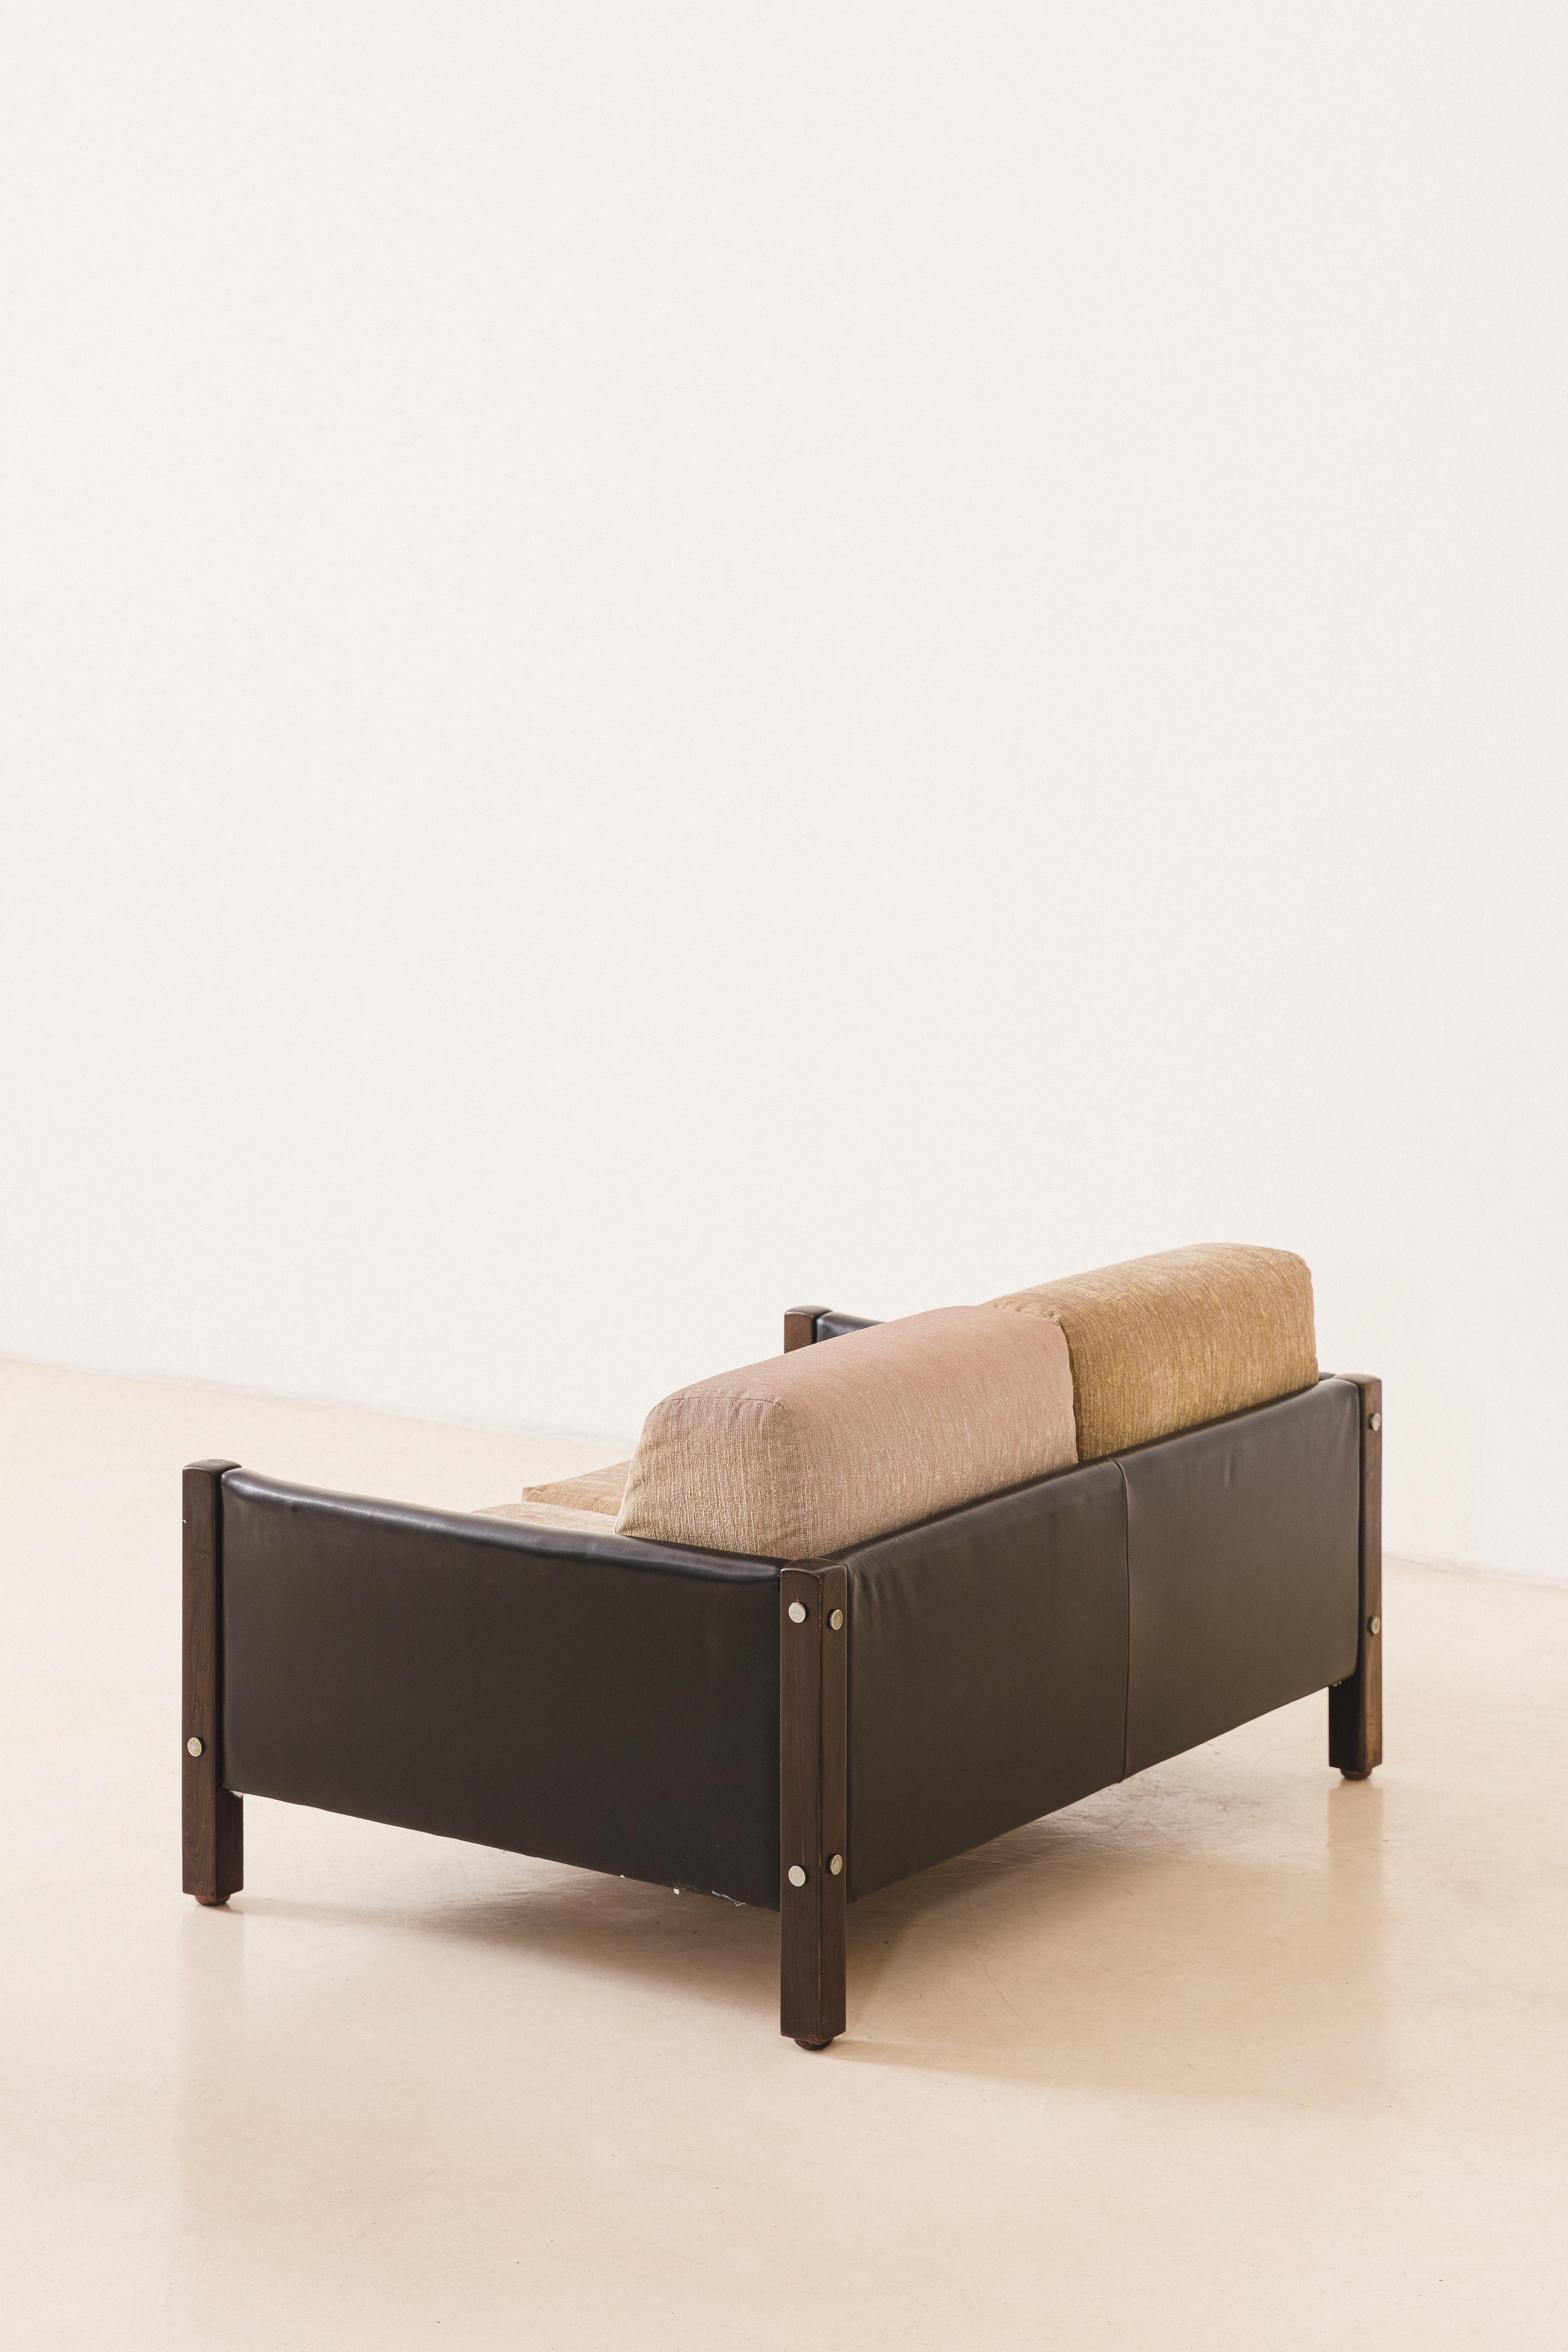 Rosewood Two-Seat Millor Sofa, Sergio Rodrigues Modern Design, Brazil, 1960s For Sale 1